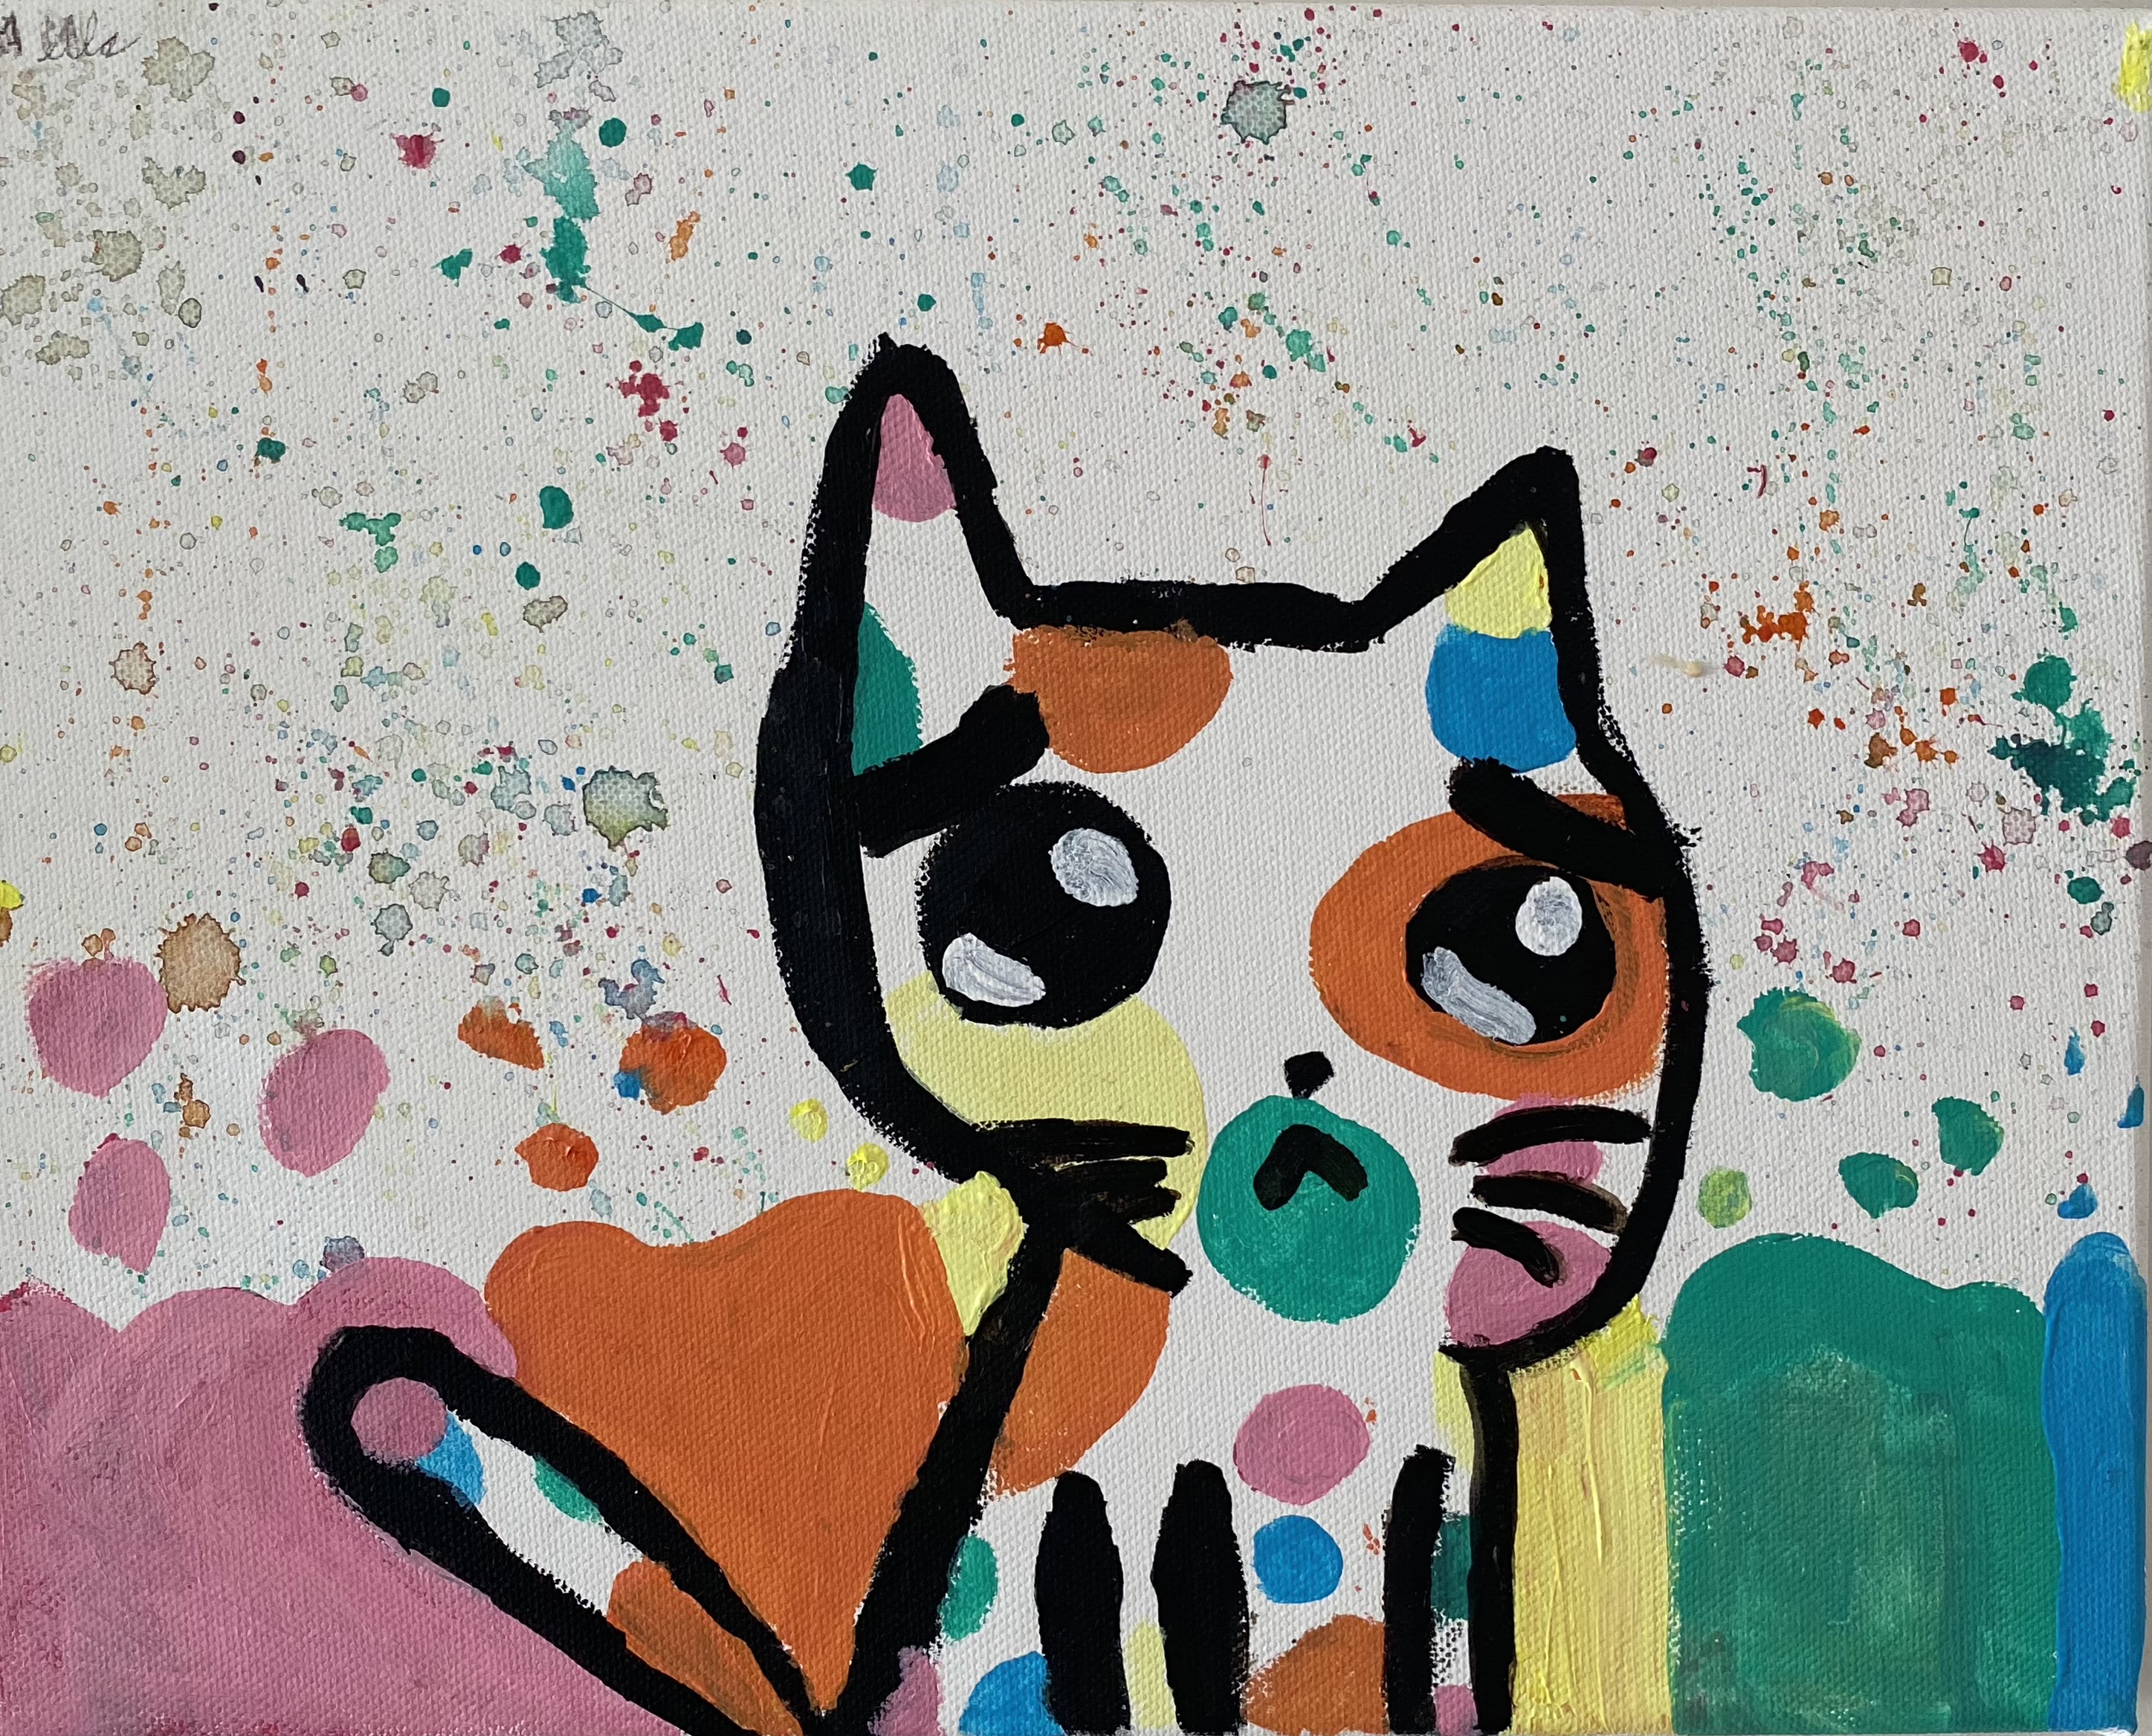 'Bold cat' by Mella (11) from Dublin